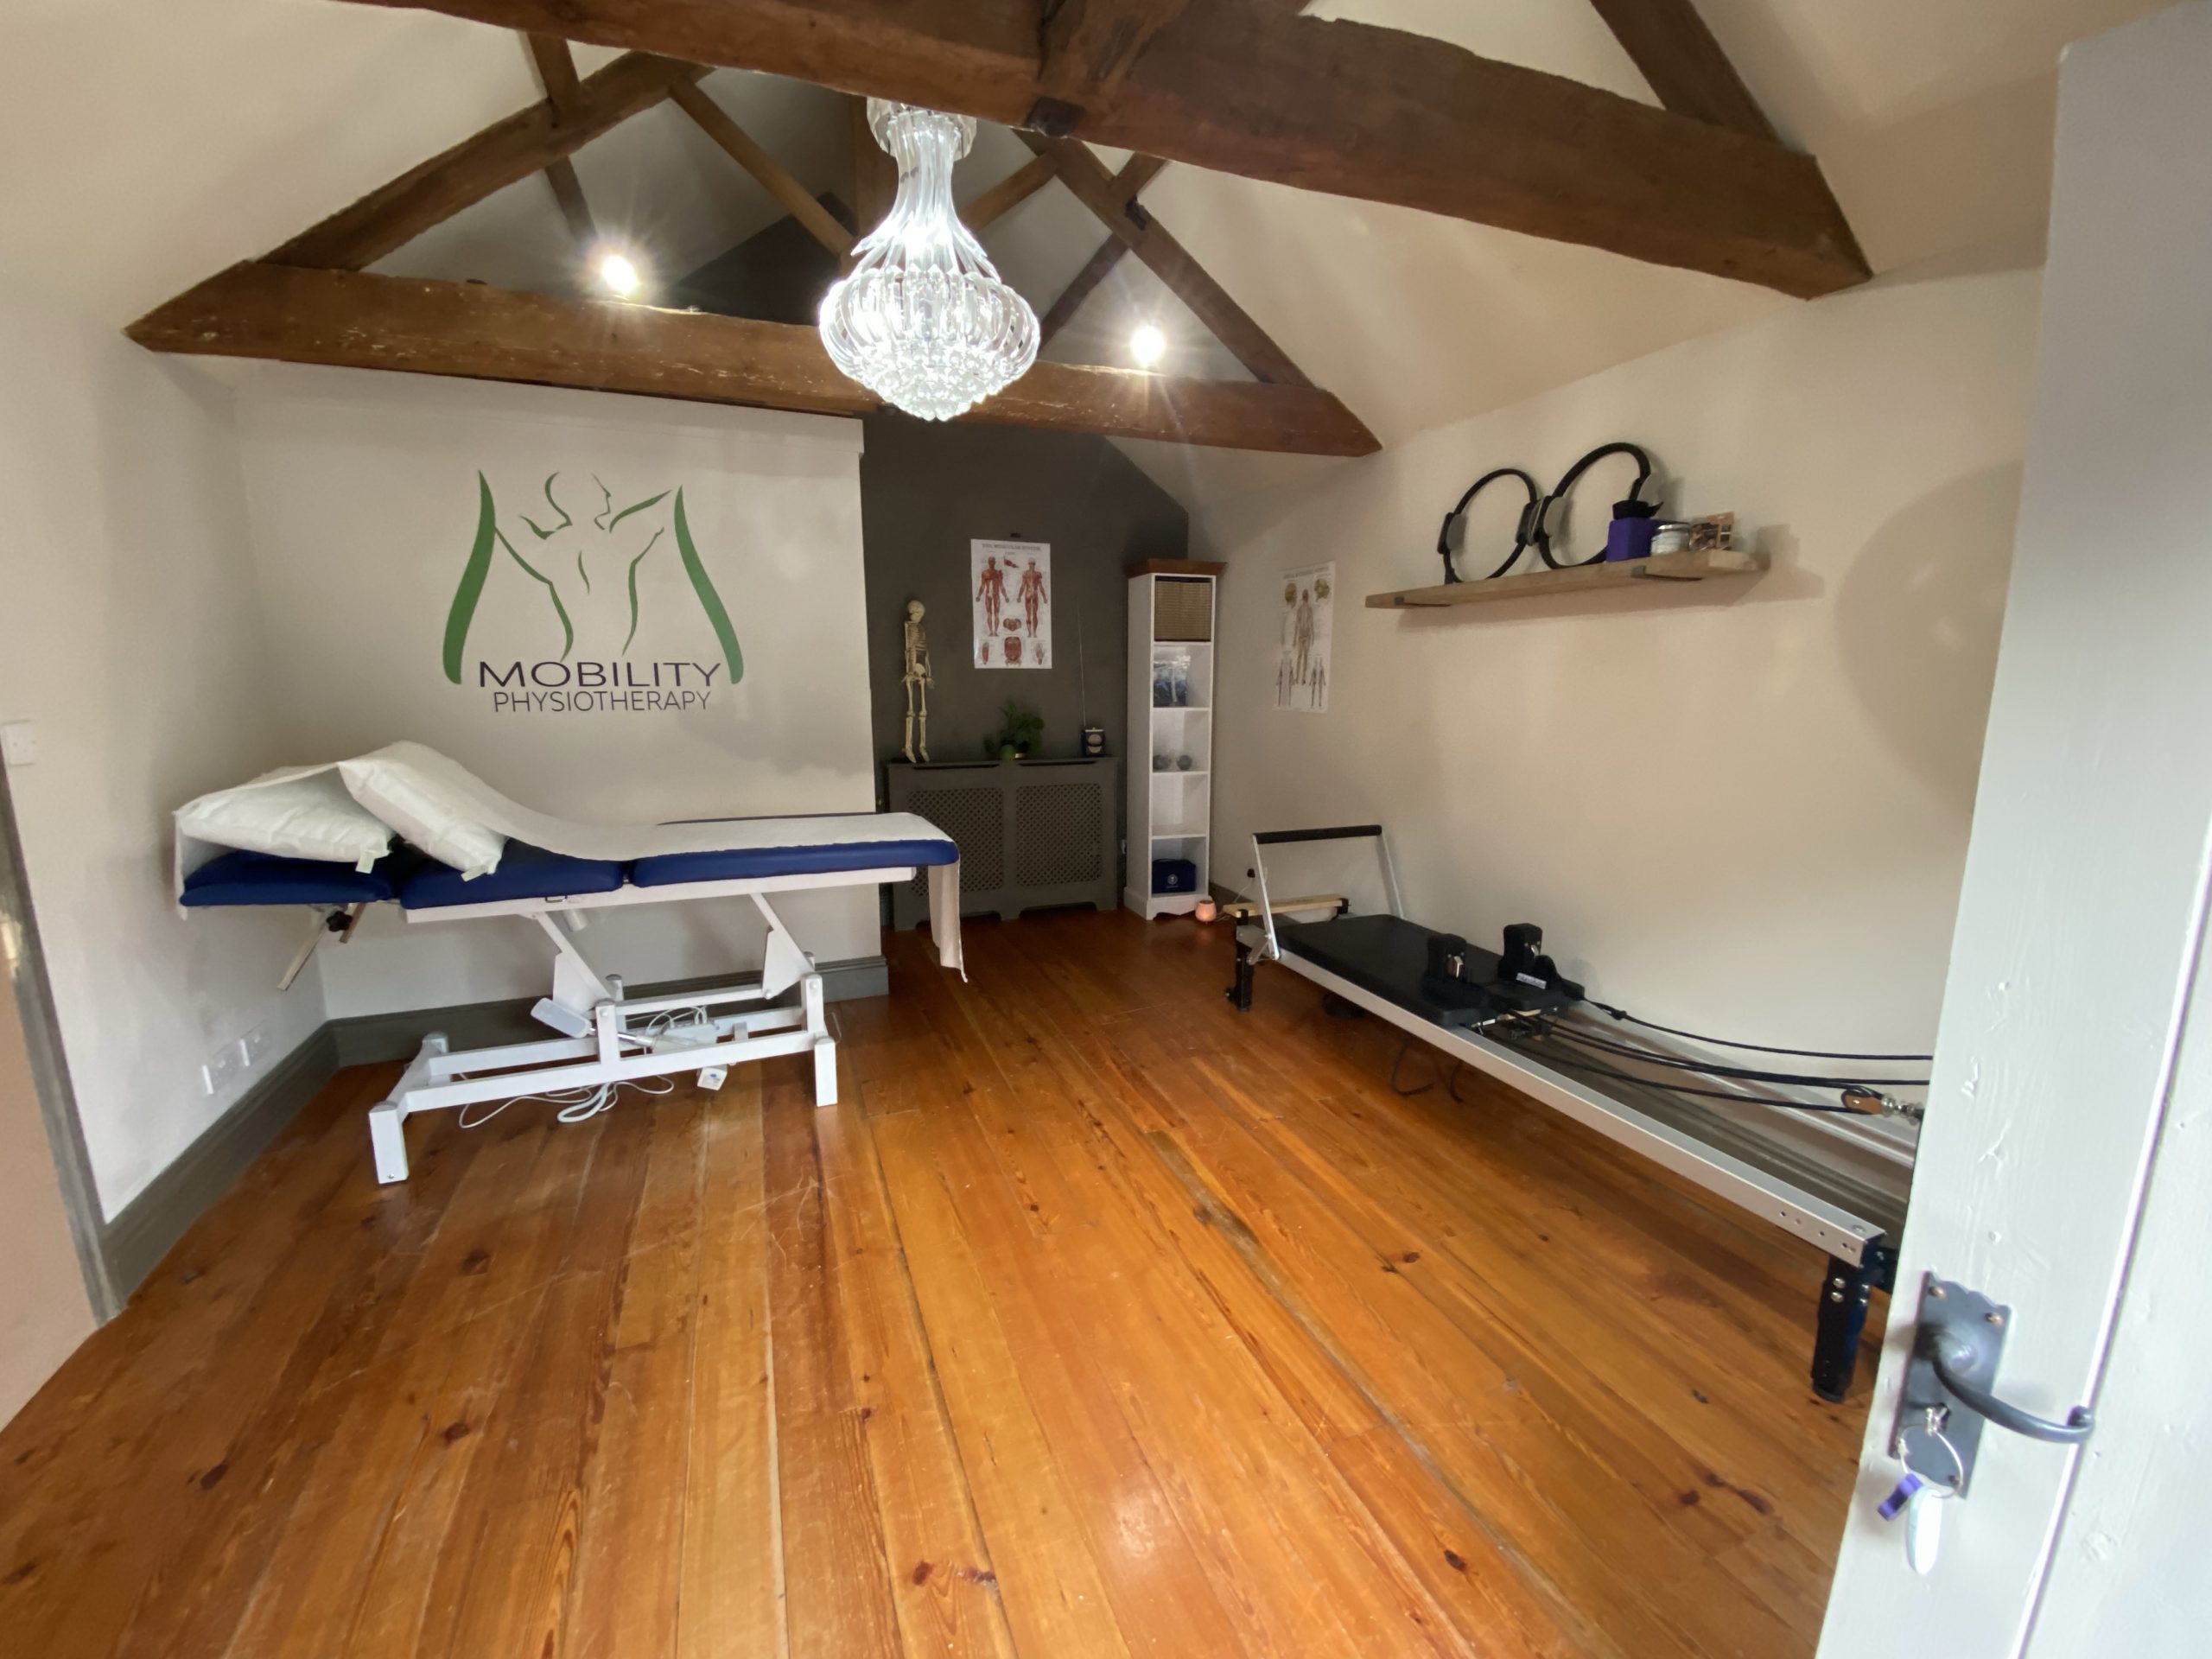 You are currently viewing Mobility physiotherapy & Pilates studio open from 7th September